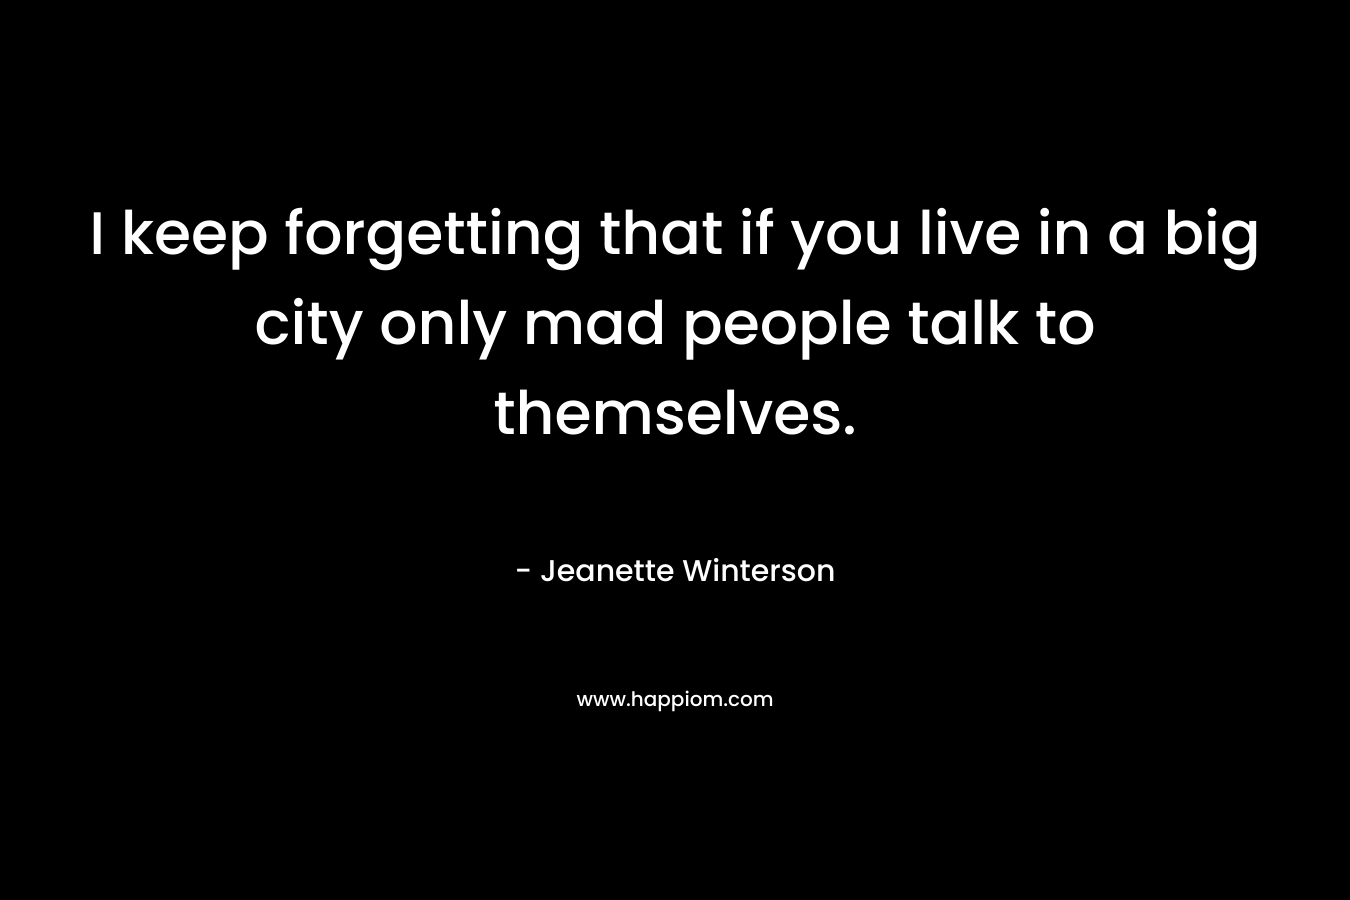 I keep forgetting that if you live in a big city only mad people talk to themselves. – Jeanette Winterson